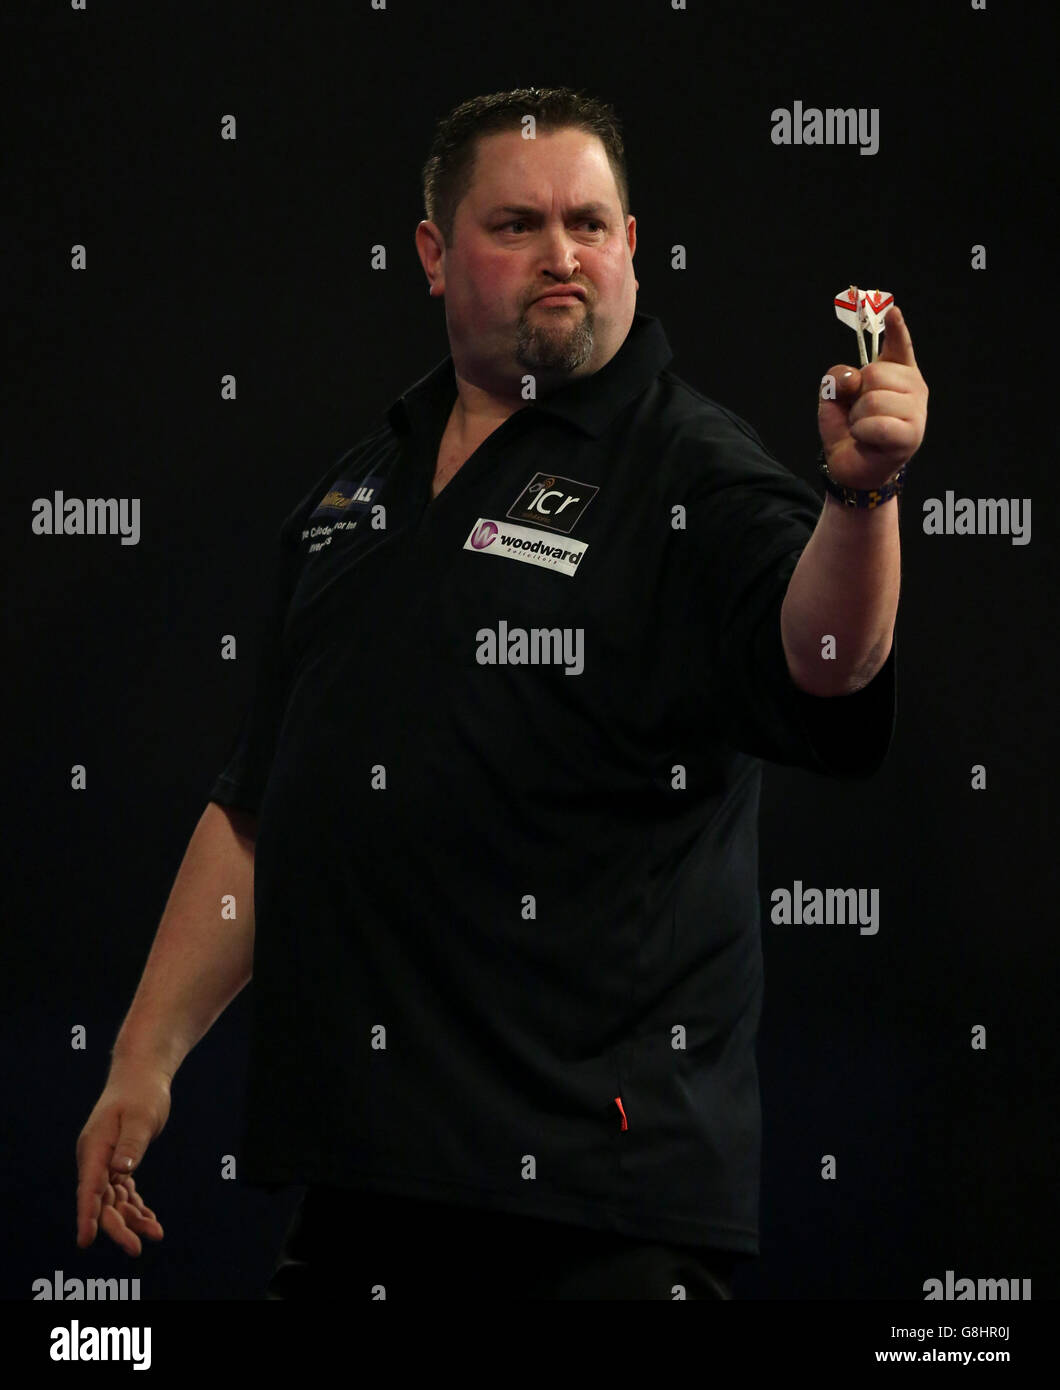 Alan Norris reacts during his match with Robert Thornton during day five of the William Hill PDC World Championship at Alexandra Palace, London. PRESS ASSOCIATION Photo. Picture date: Monday December 21, 2015. See PA story DARTS World. Photo credit should read: Simon Cooper/PA Wire. Stock Photo